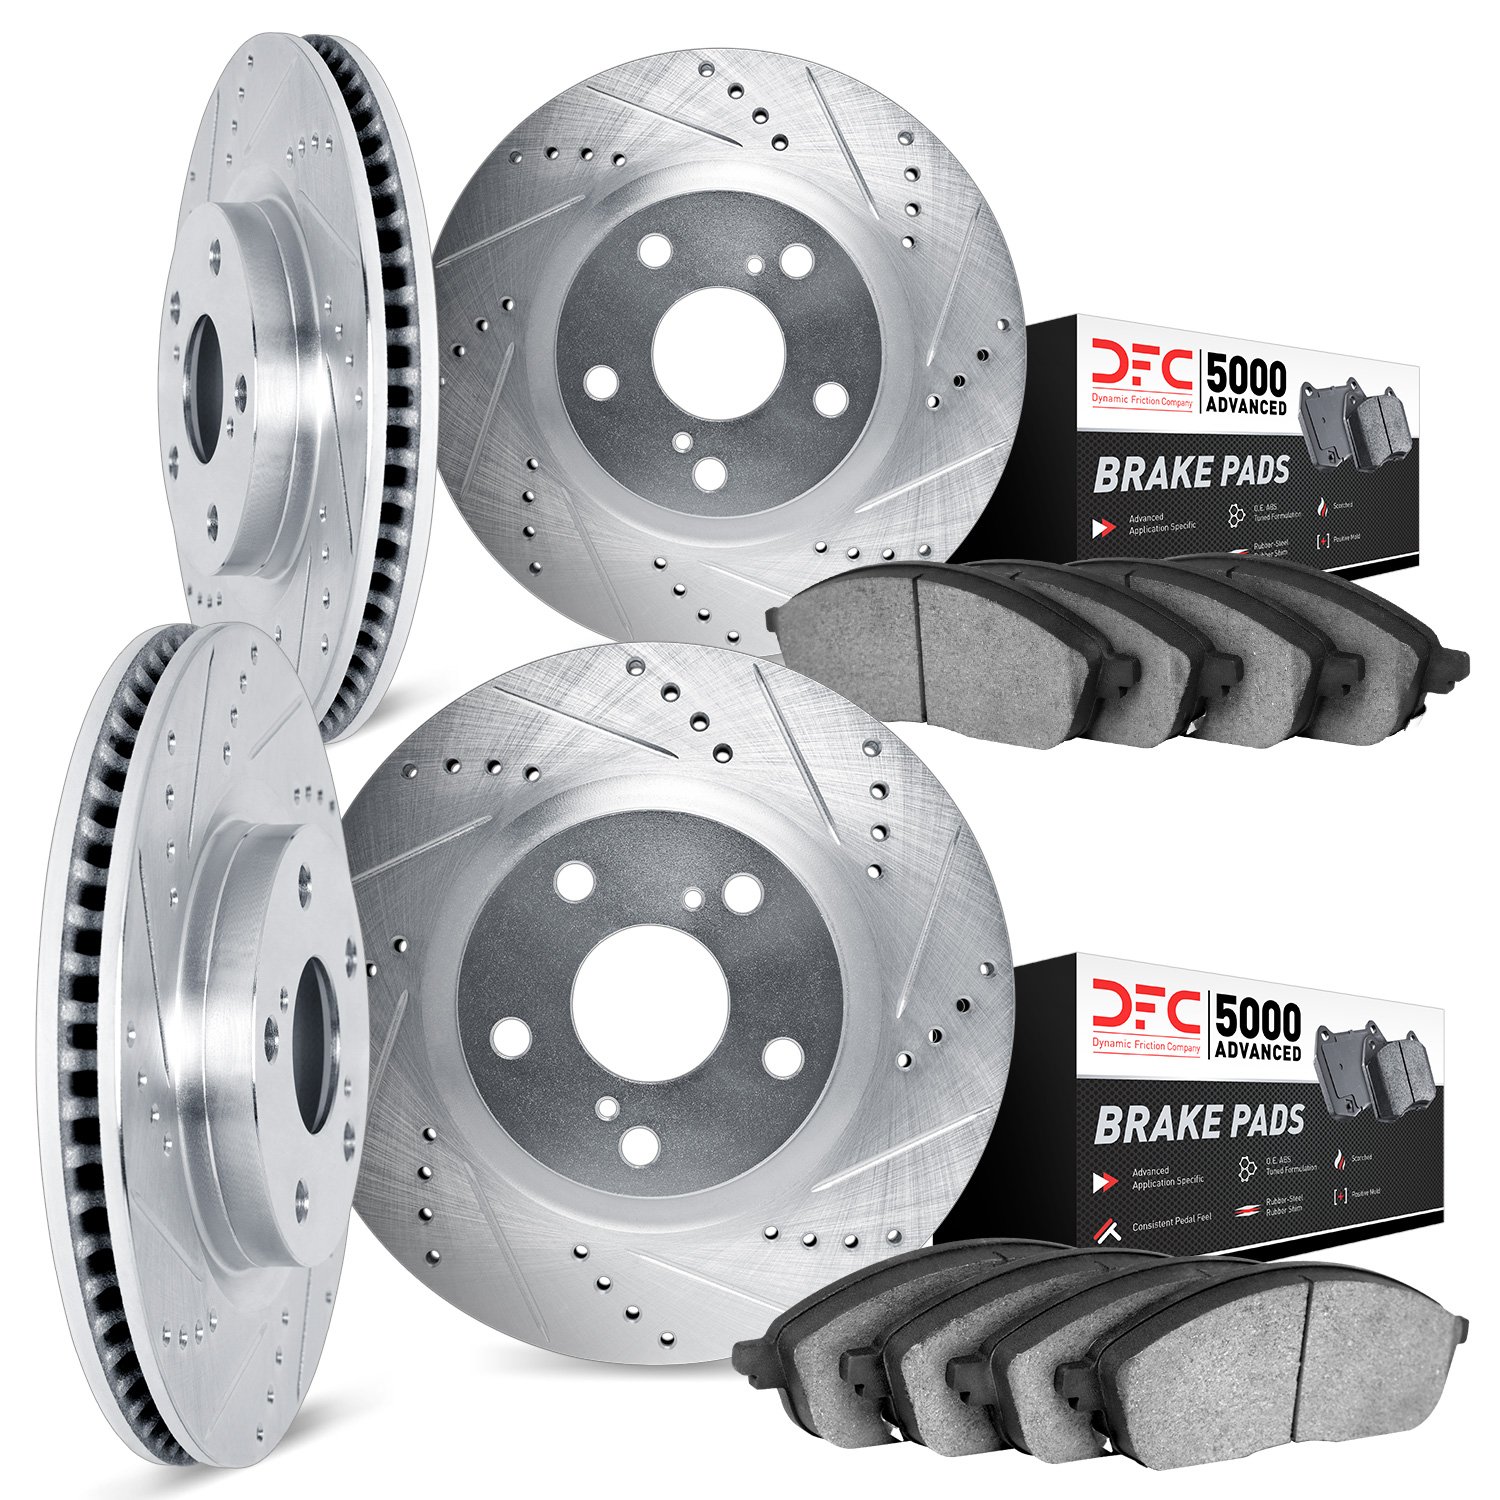 7504-39030 Drilled/Slotted Brake Rotors w/5000 Advanced Brake Pads Kit [Silver], 2005-2018 Mopar, Position: Front and Rear